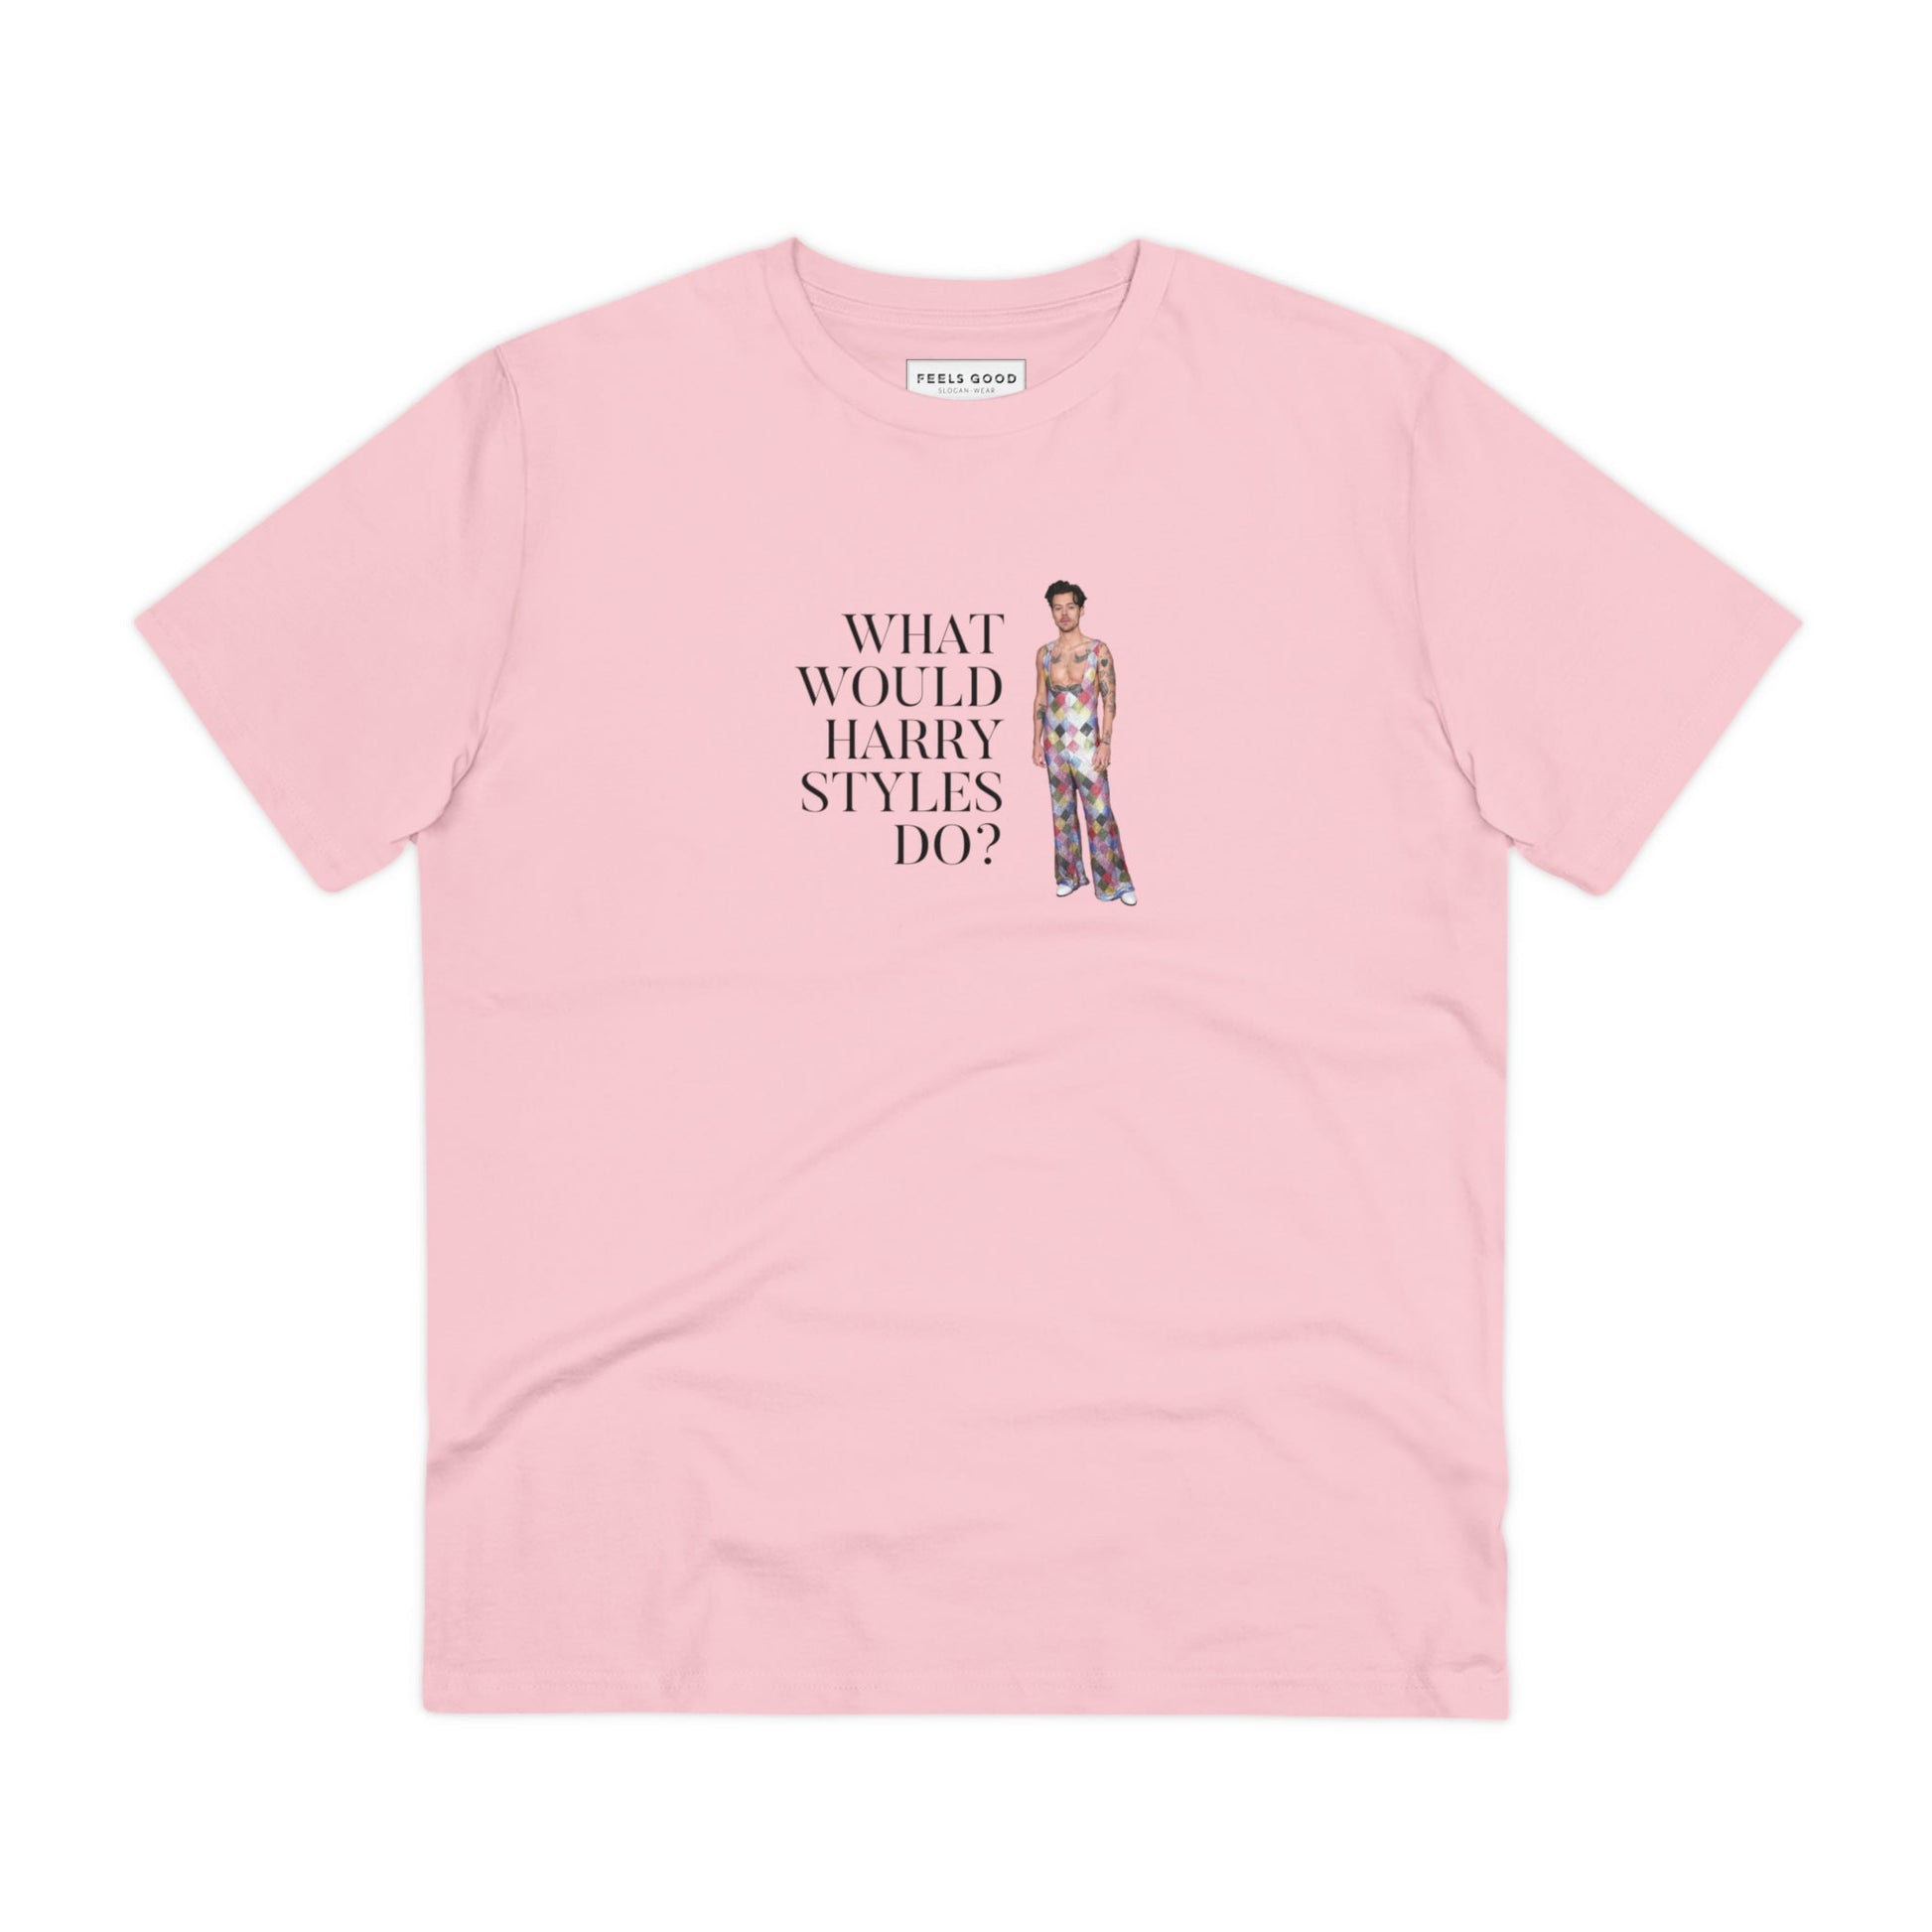 Contemporary 'What Would Harry Styles Do?' Organic Cotton T-shirt - Eco Tshirt